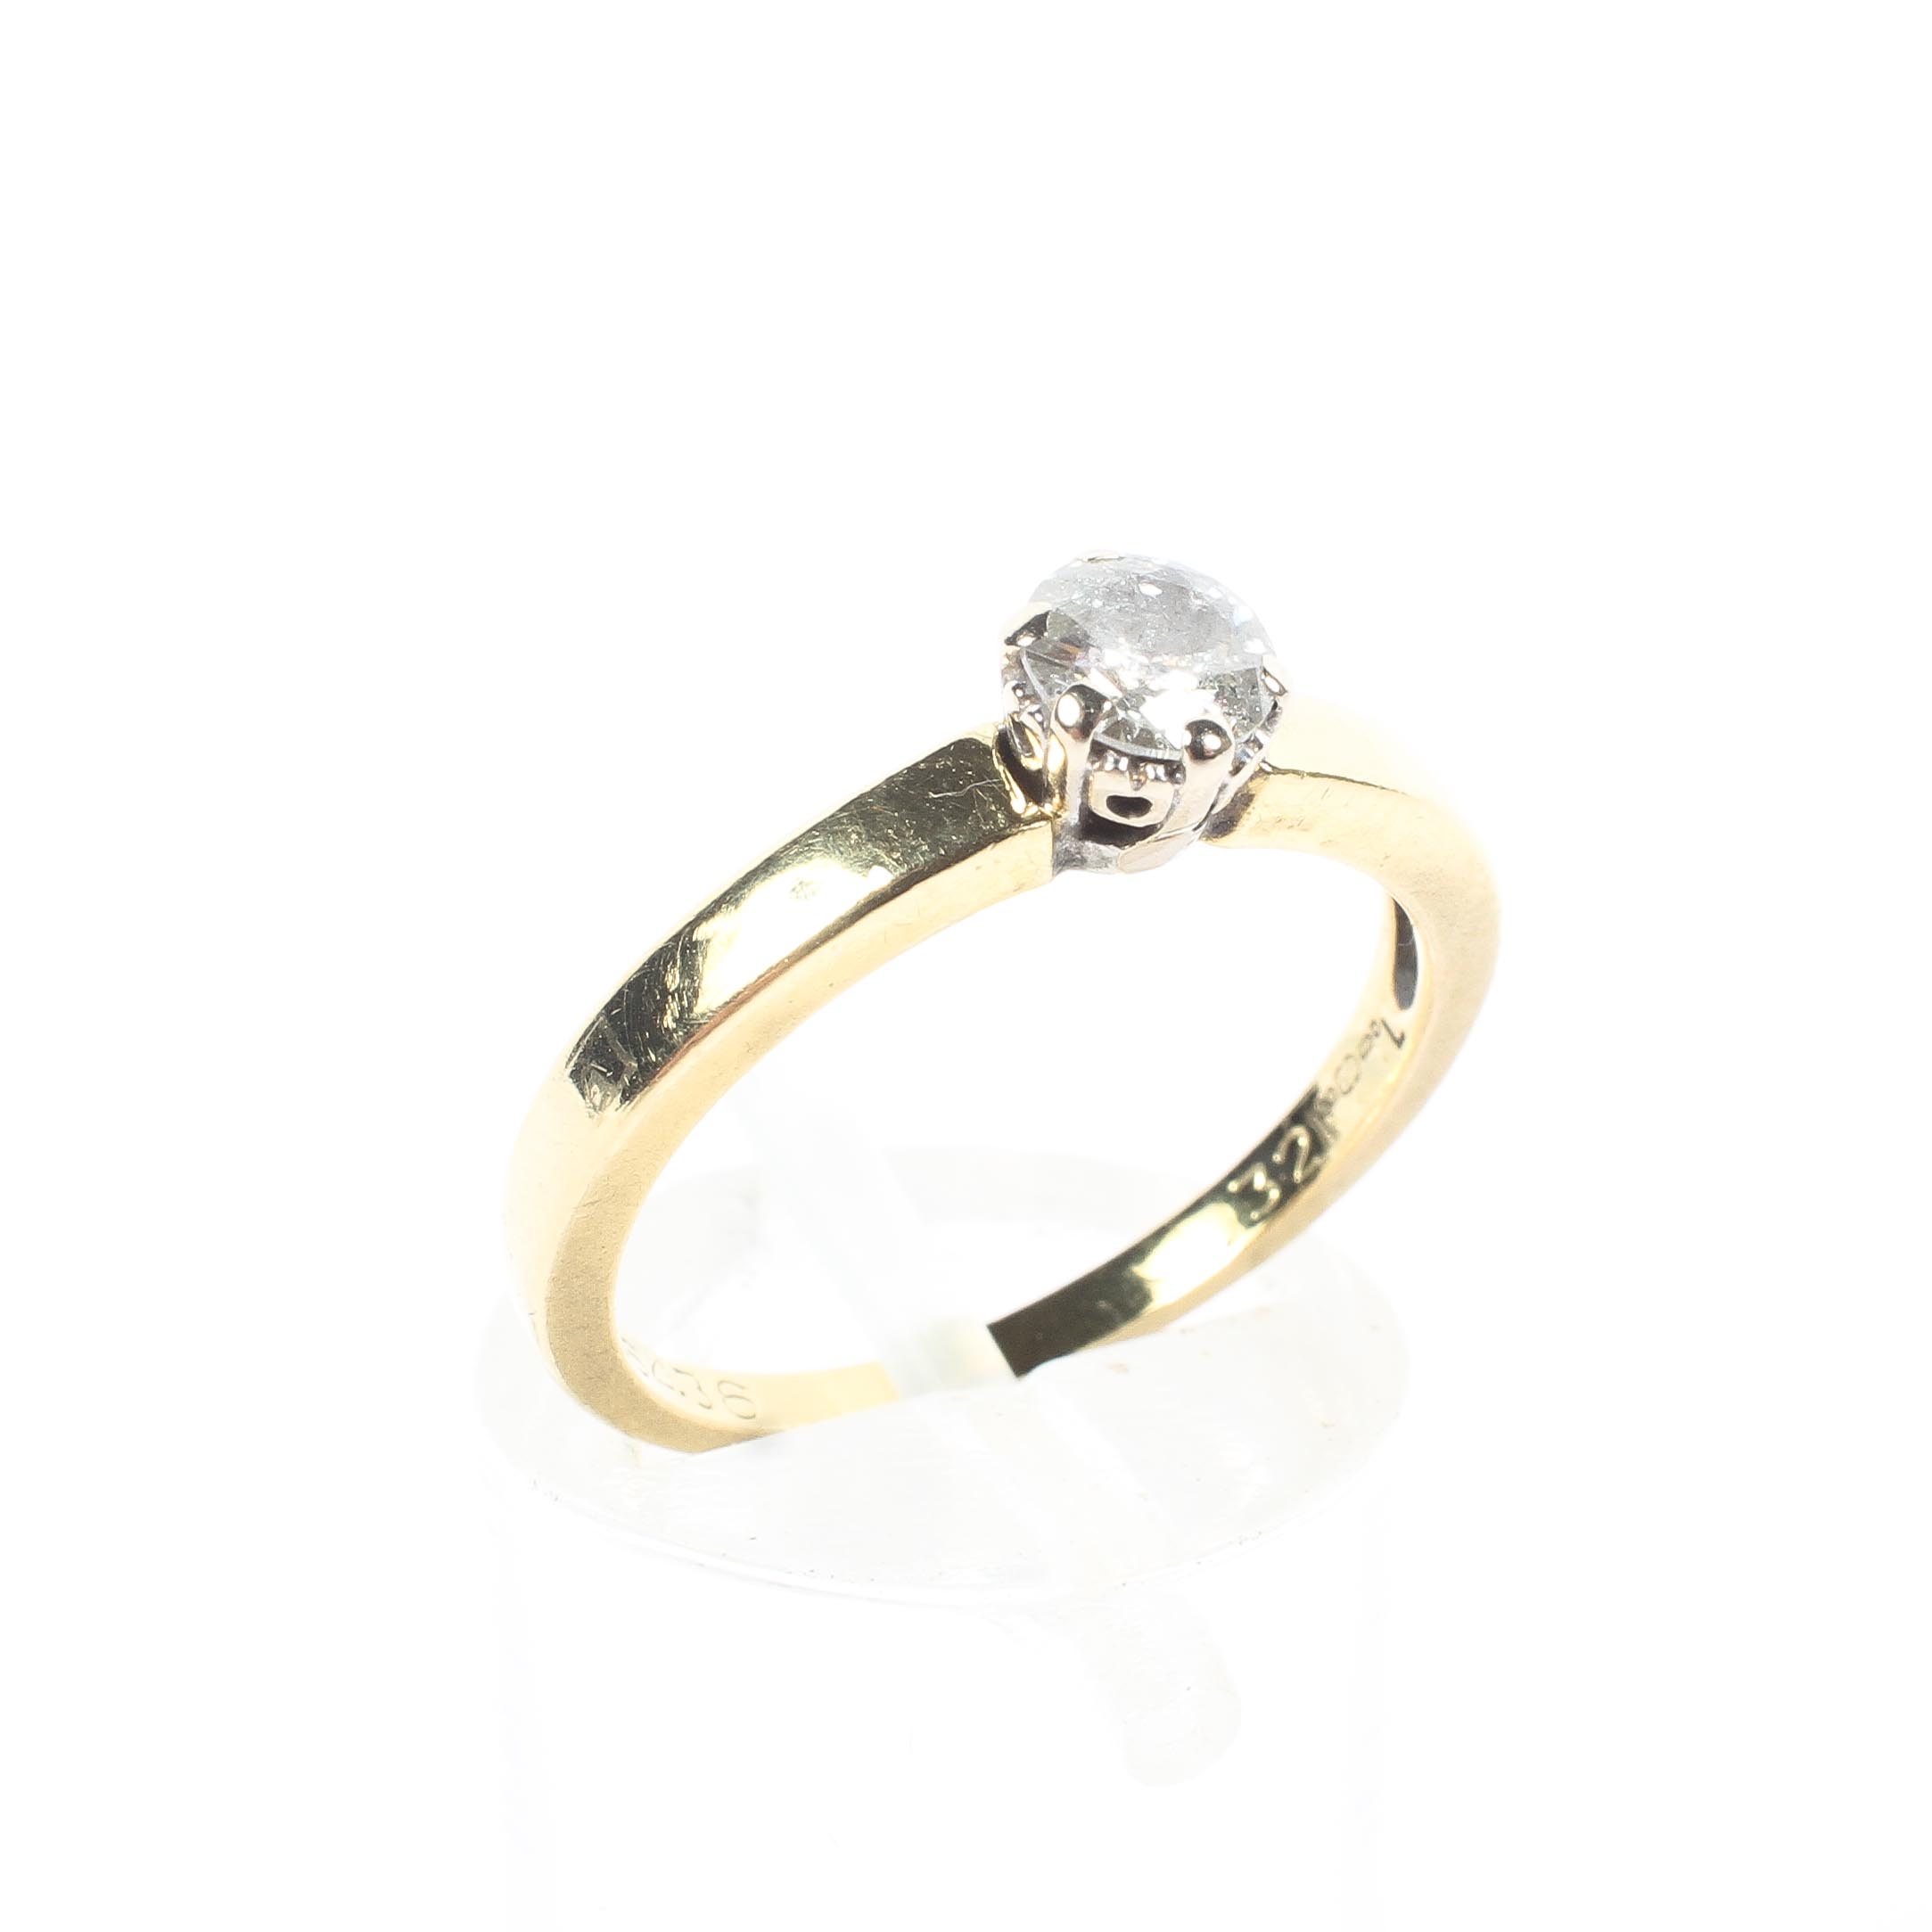 An 18ct gold solitare diamond ring, 0.